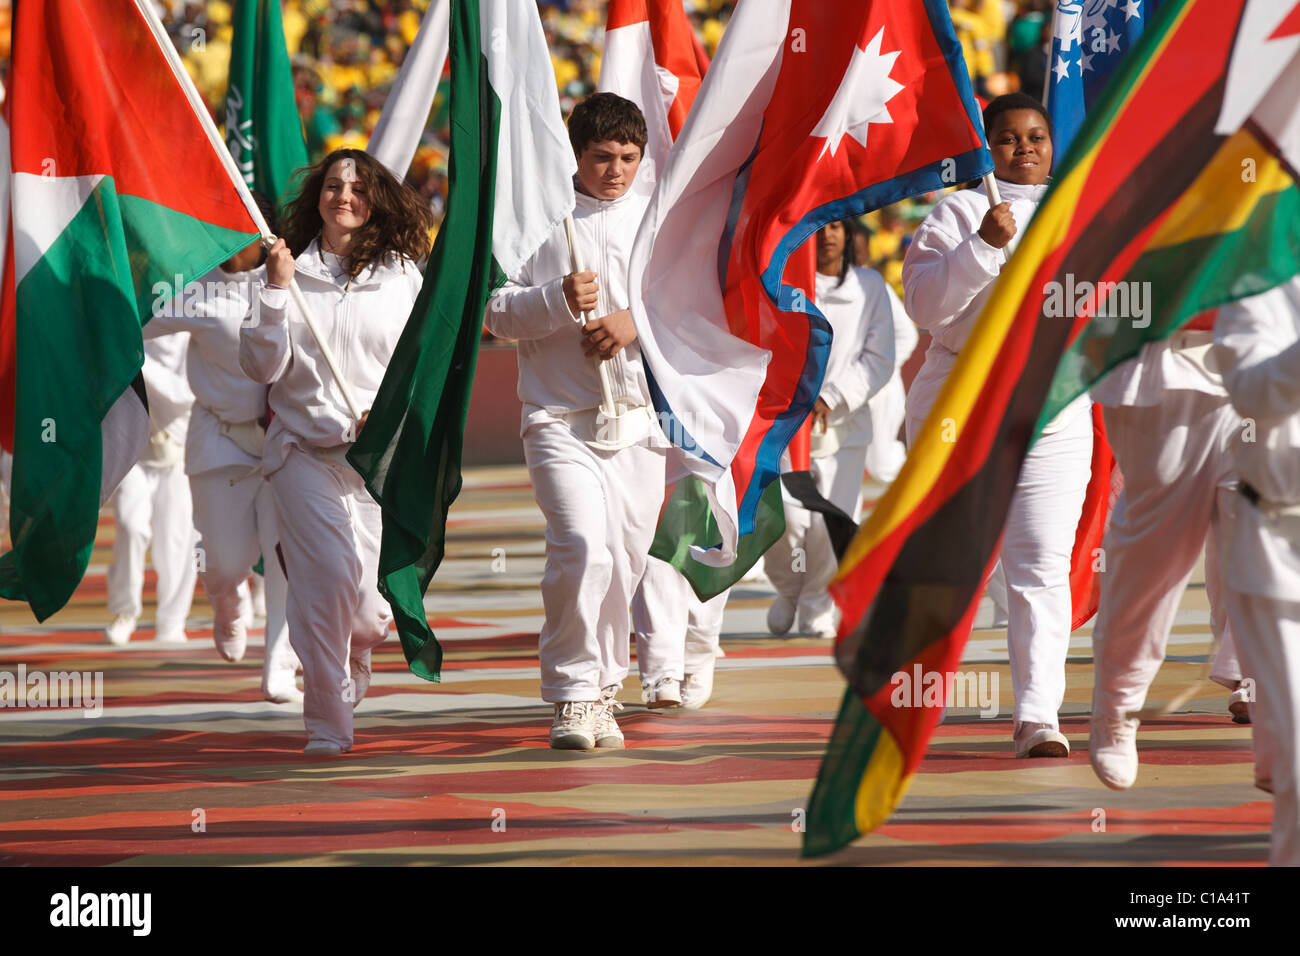 Children carry country flags as part of the opening ceremony of the 2010 FIFA World Cup soccer tournament June 11, 2010. Stock Photo